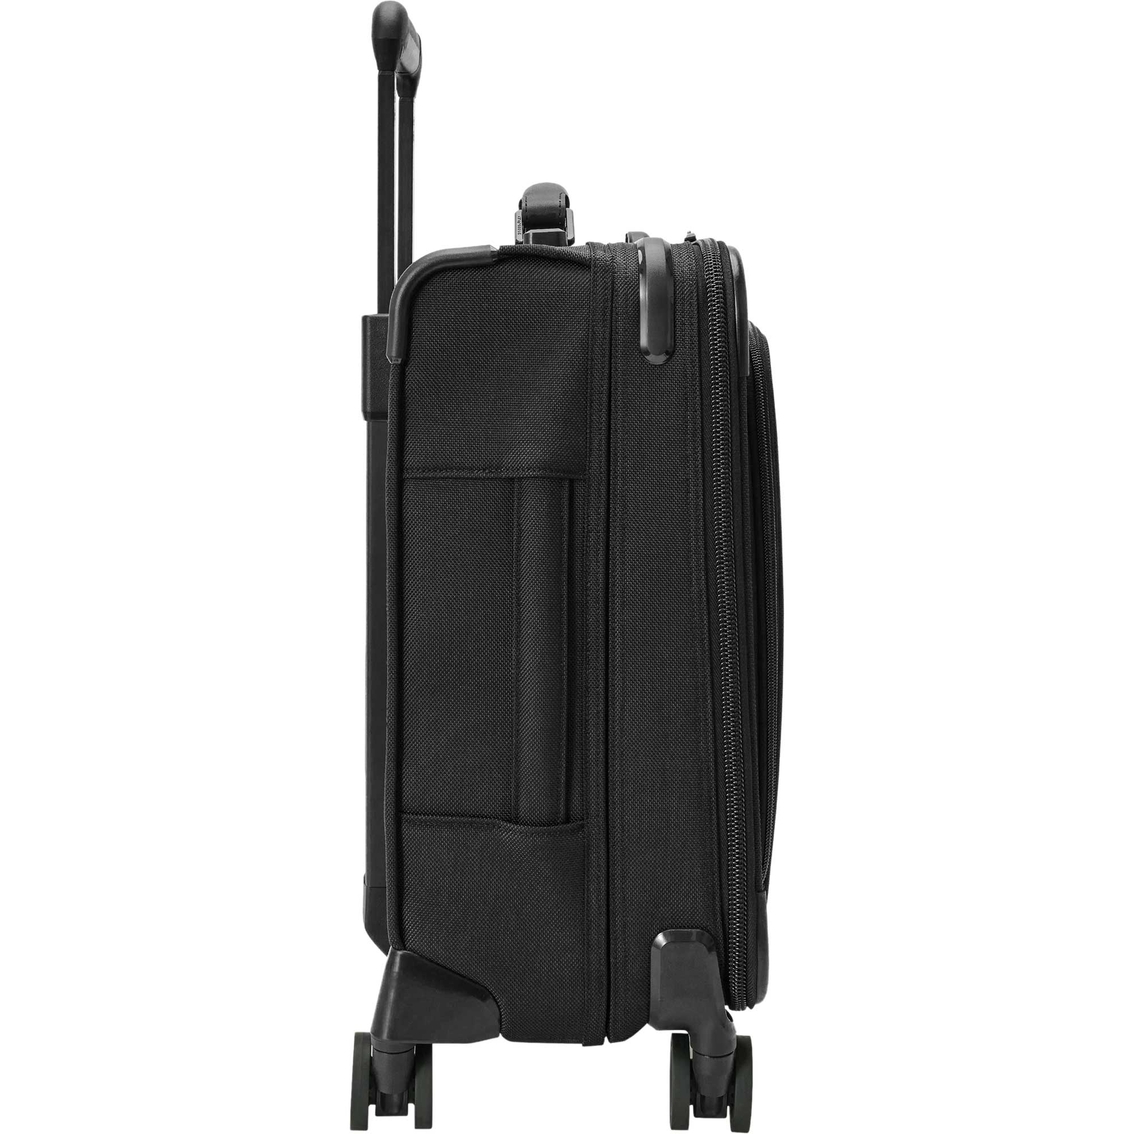 Briggs & Riley Baseline Compact Carry On Spinner, Black - Image 4 of 9